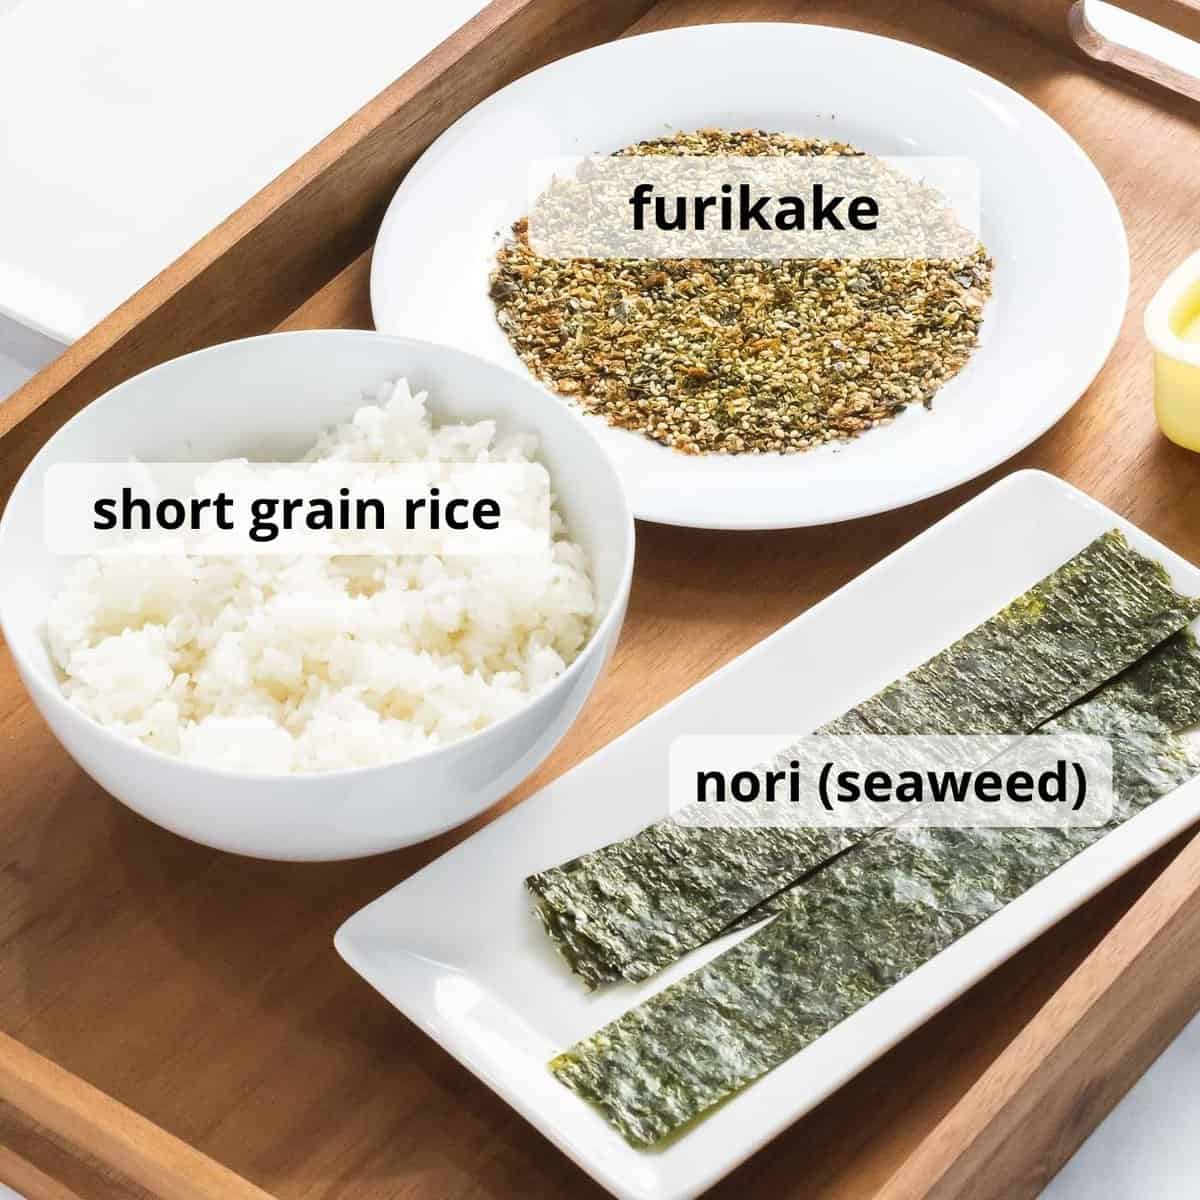 Ingredients for onigiri with text overlay.